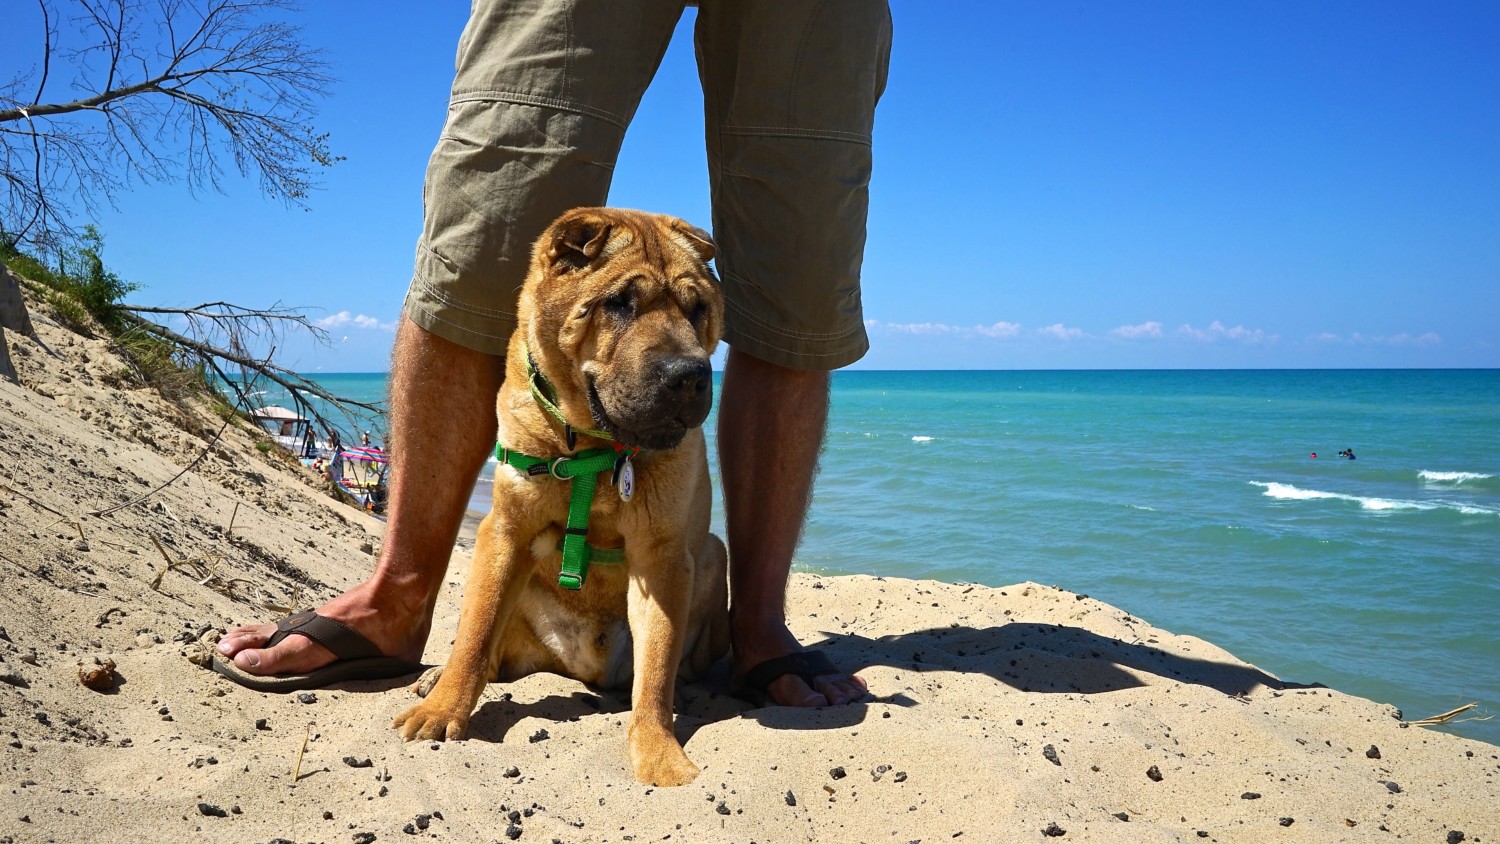 Indiana's Top Pet Friendly Attraction: Indiana Dunes Lakeshore | GoPetFriendly.com